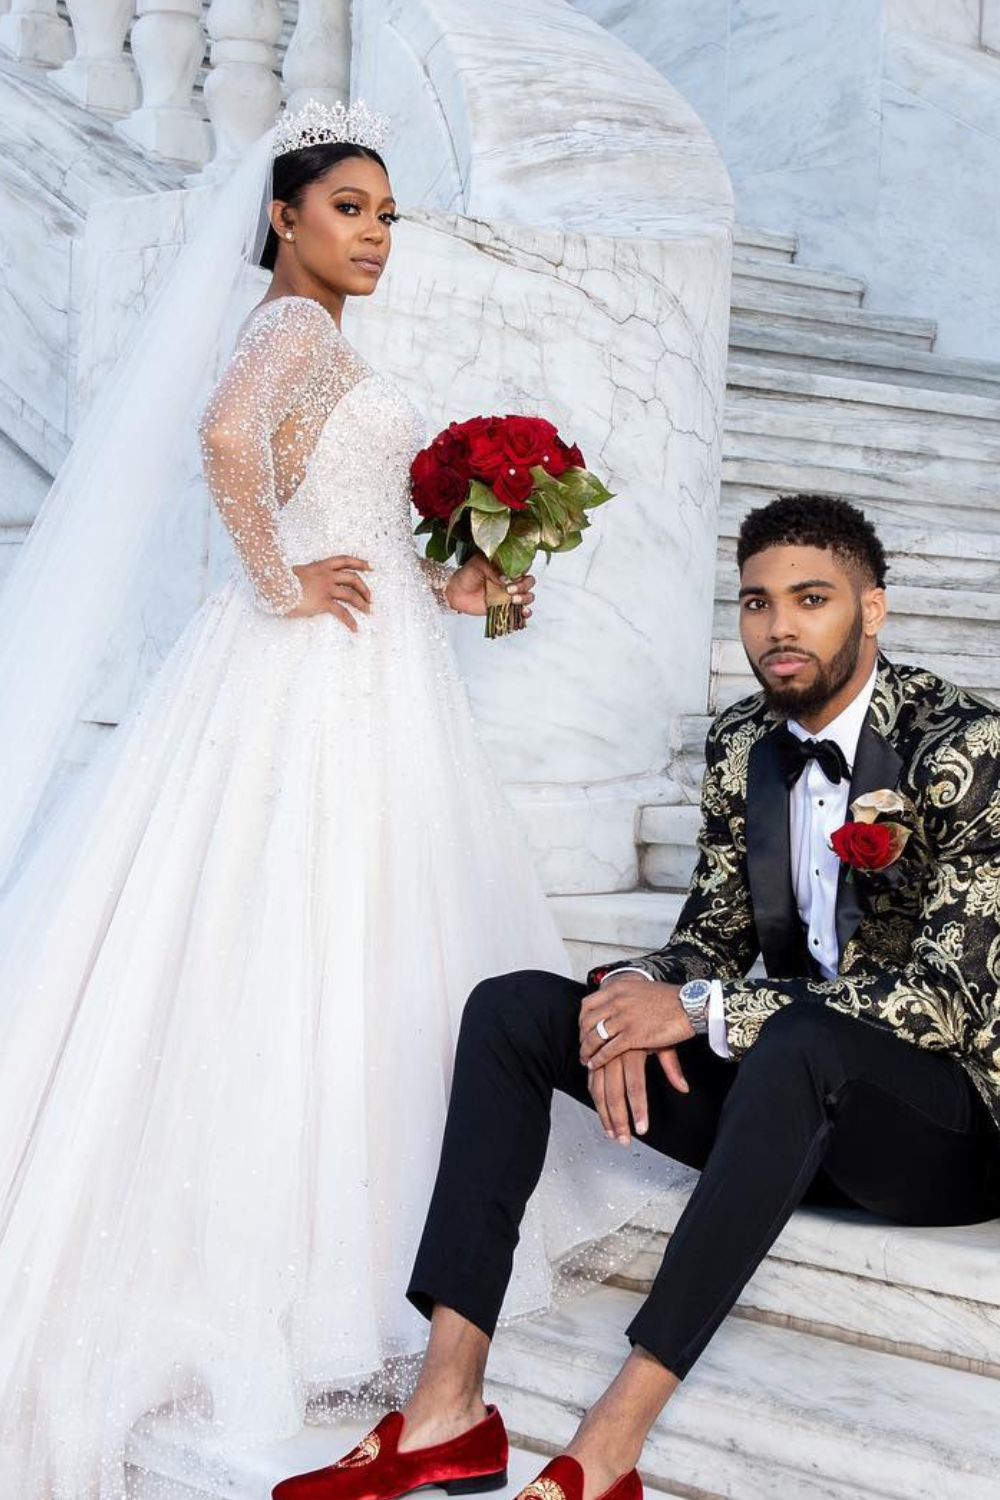 Devyn Marble And His Wife During Their Wedding Photoshoot